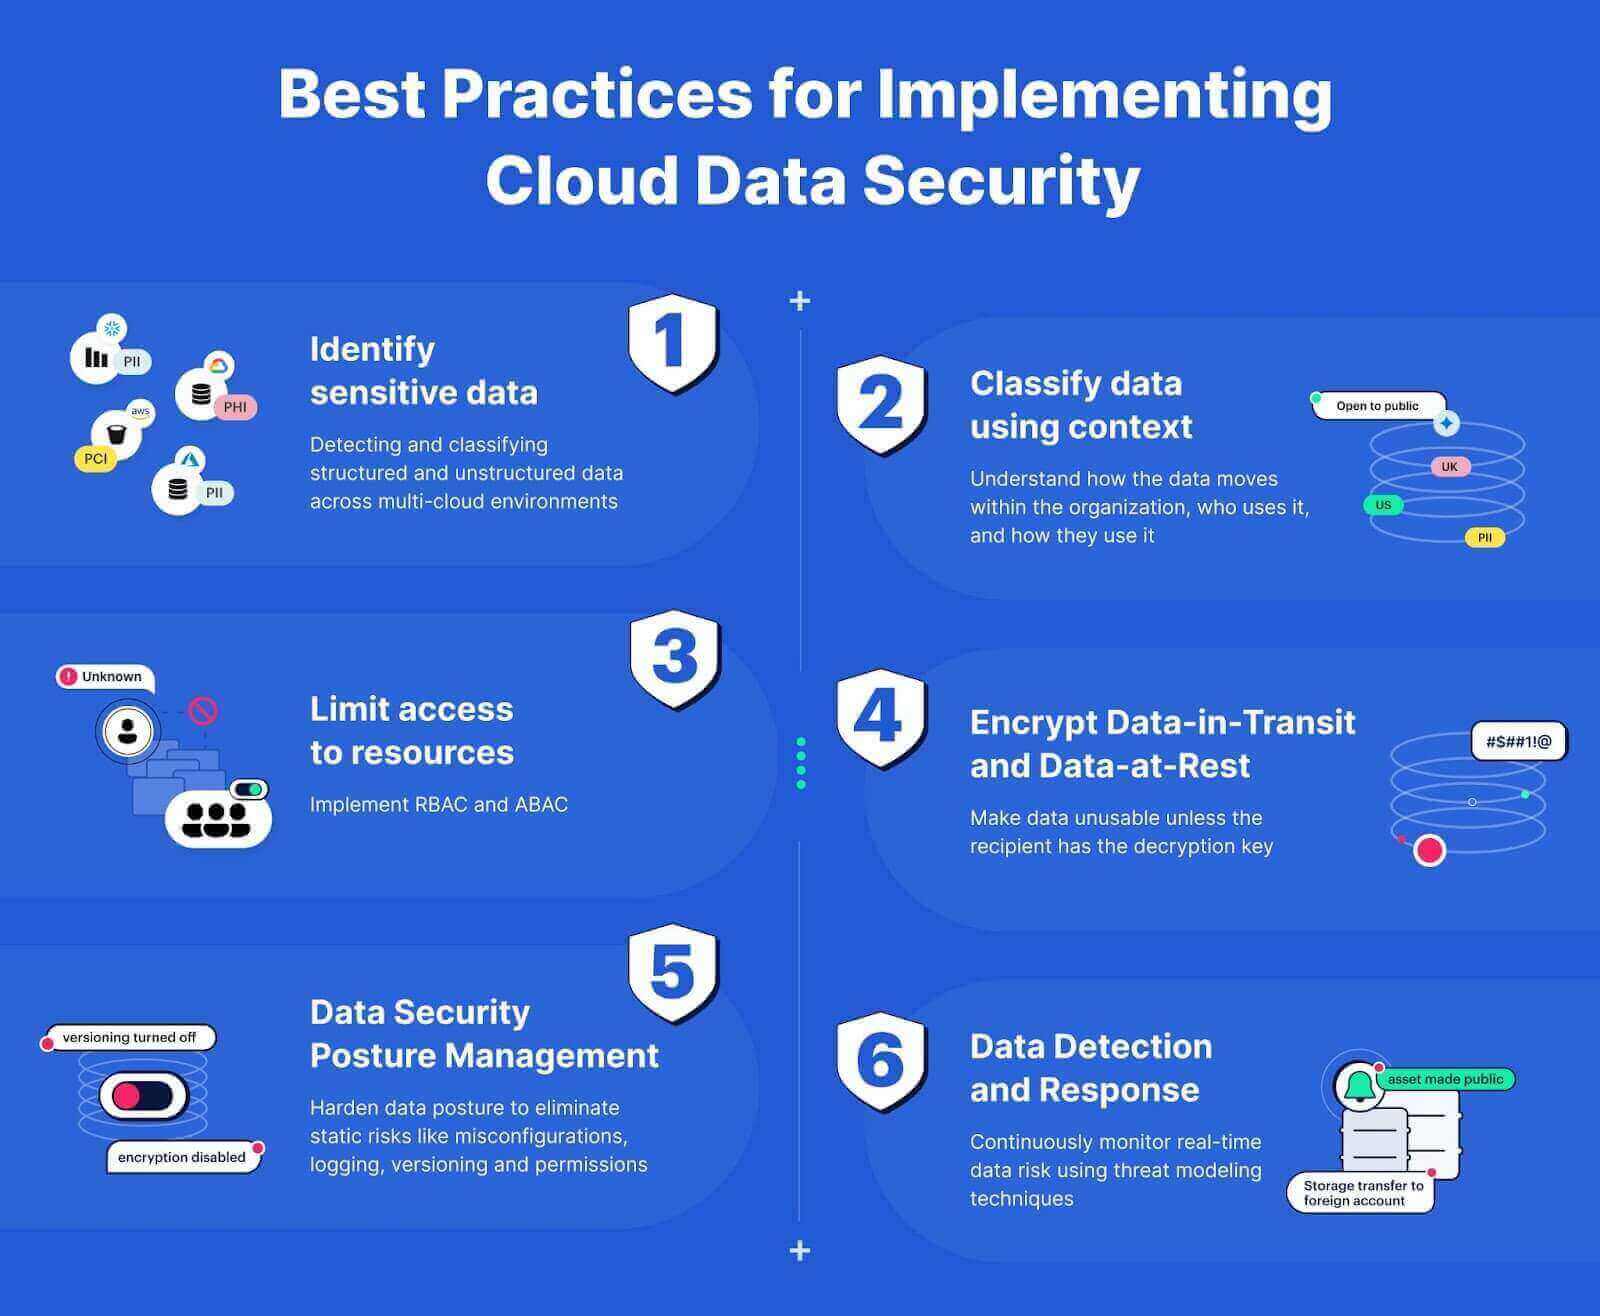 Best Practices for Implementing Cloud Data Security